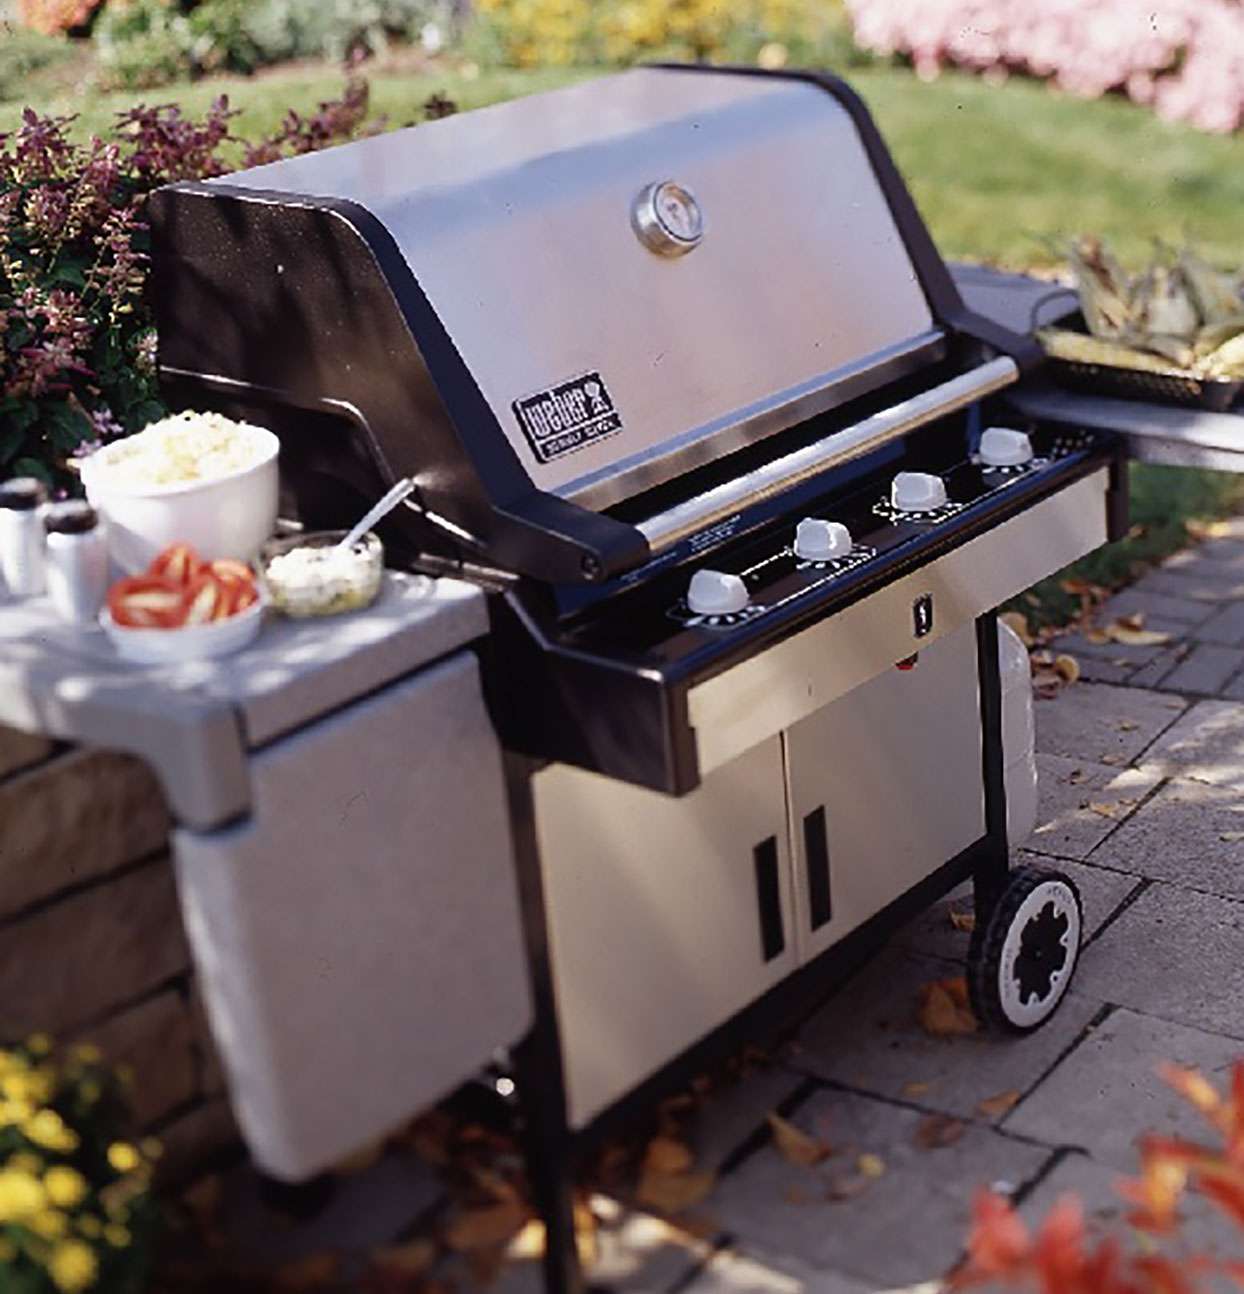 Gas-Grill